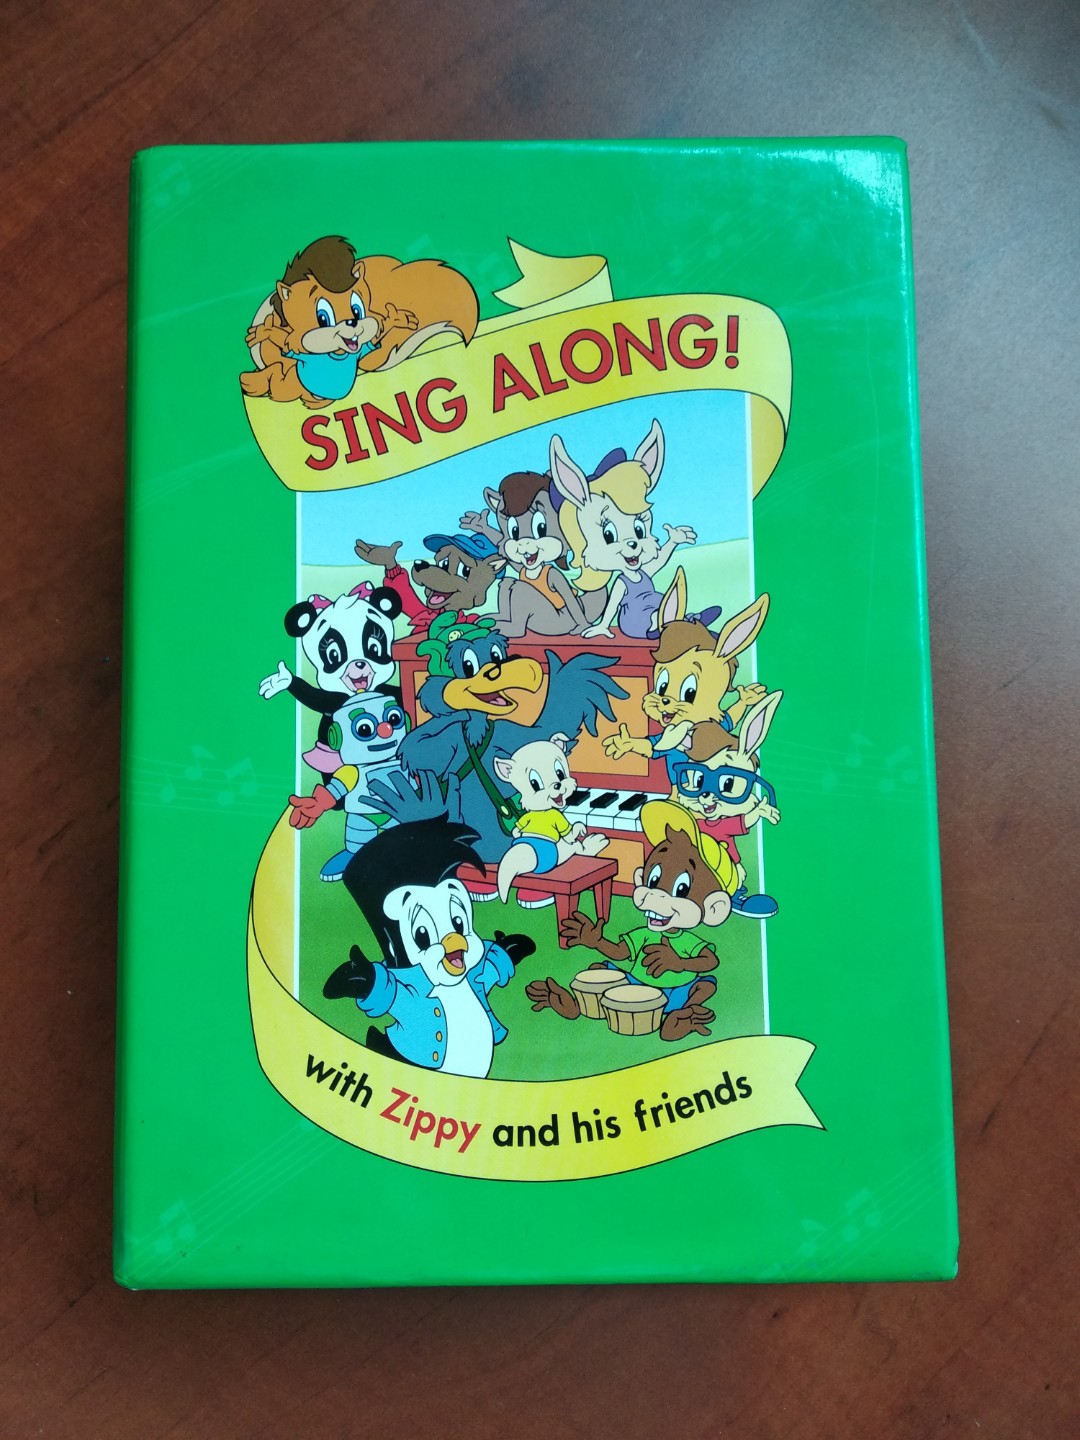 sing along with zippy and his friends CD